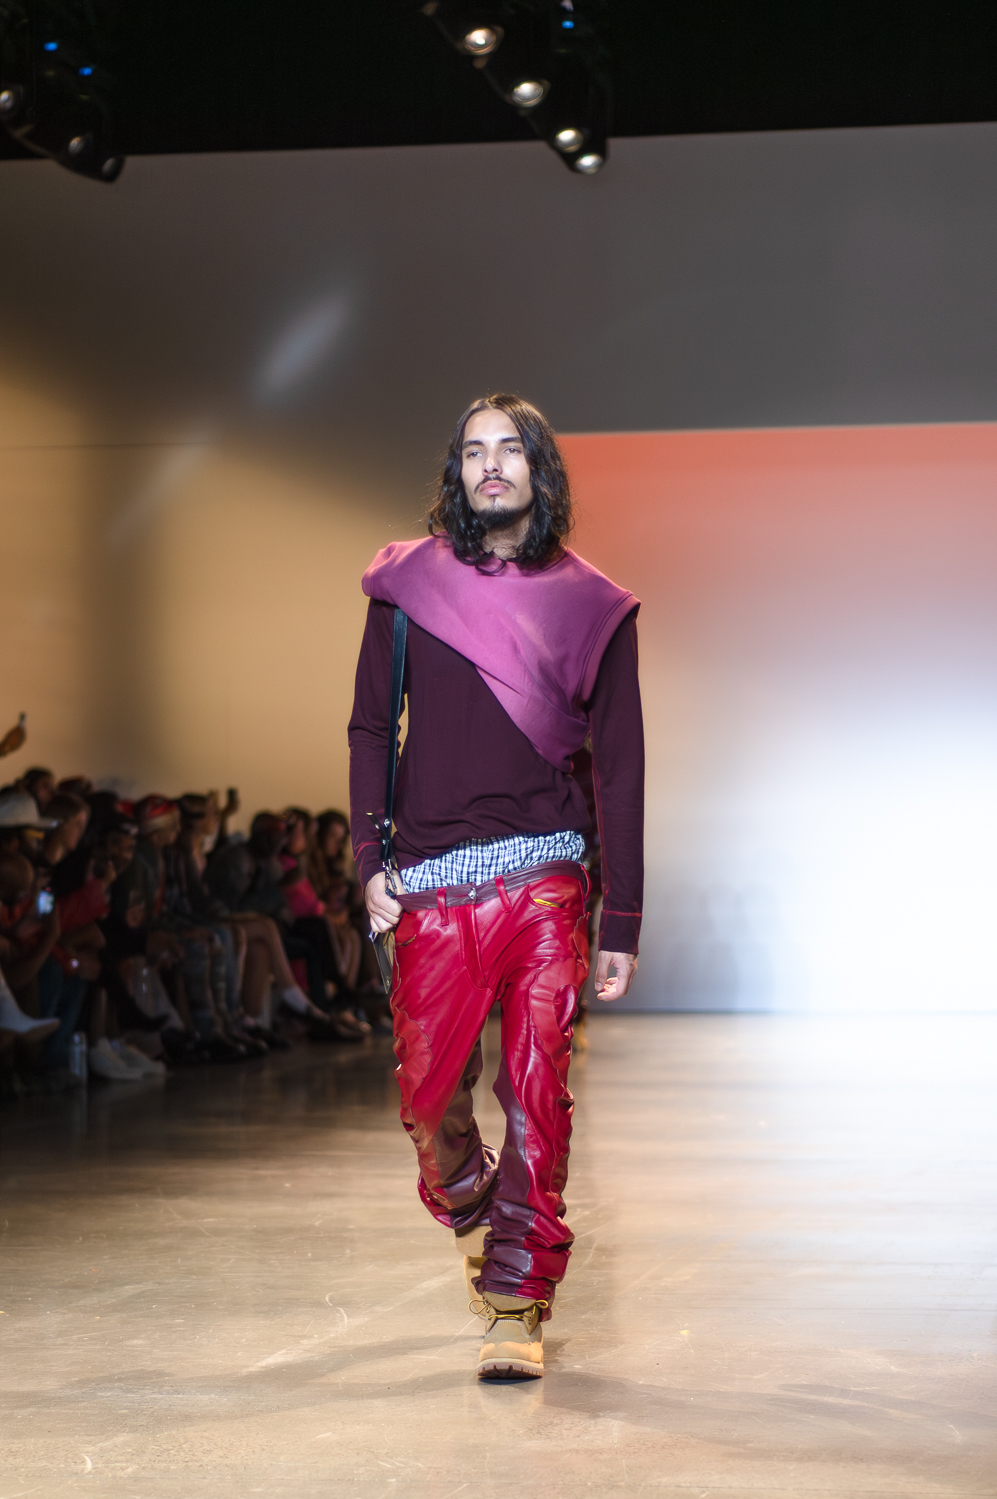 A model wearing a long-sleeve purple shirt and a rolled-up lighter-purple tank top with shoulder pads, which sits diagonally on the model’s chest, walks on a runway. The model is wearing red leather-like pants, and has a bag hanging off one shoulder. The model’s boxers are slightly visible above the pants. The model is wearing brown lace-up boots.